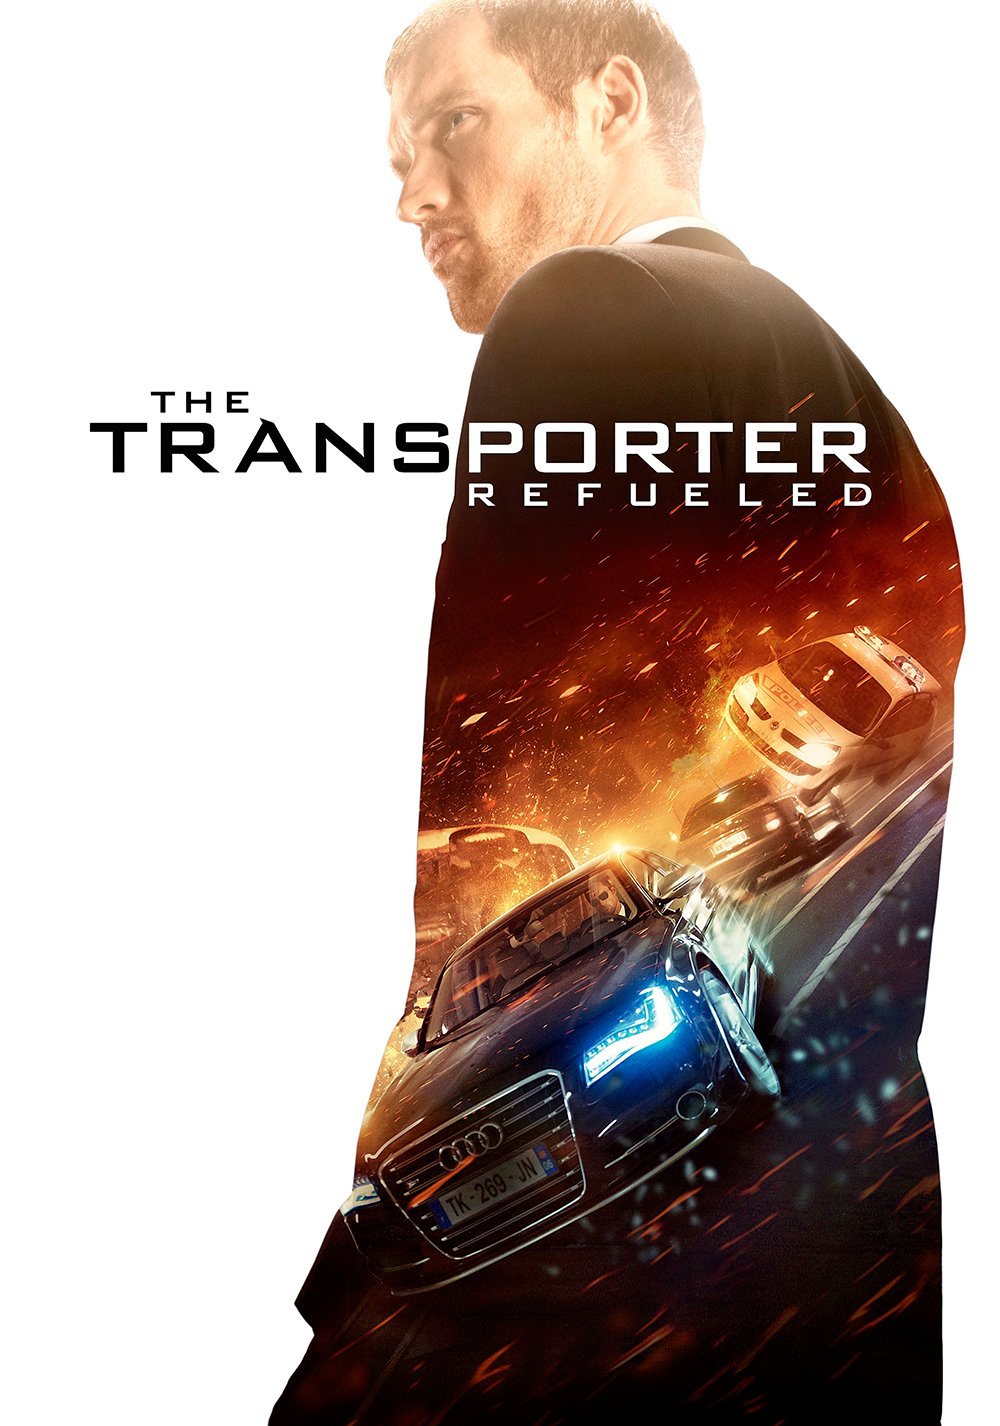 the transporter refueled movie free download